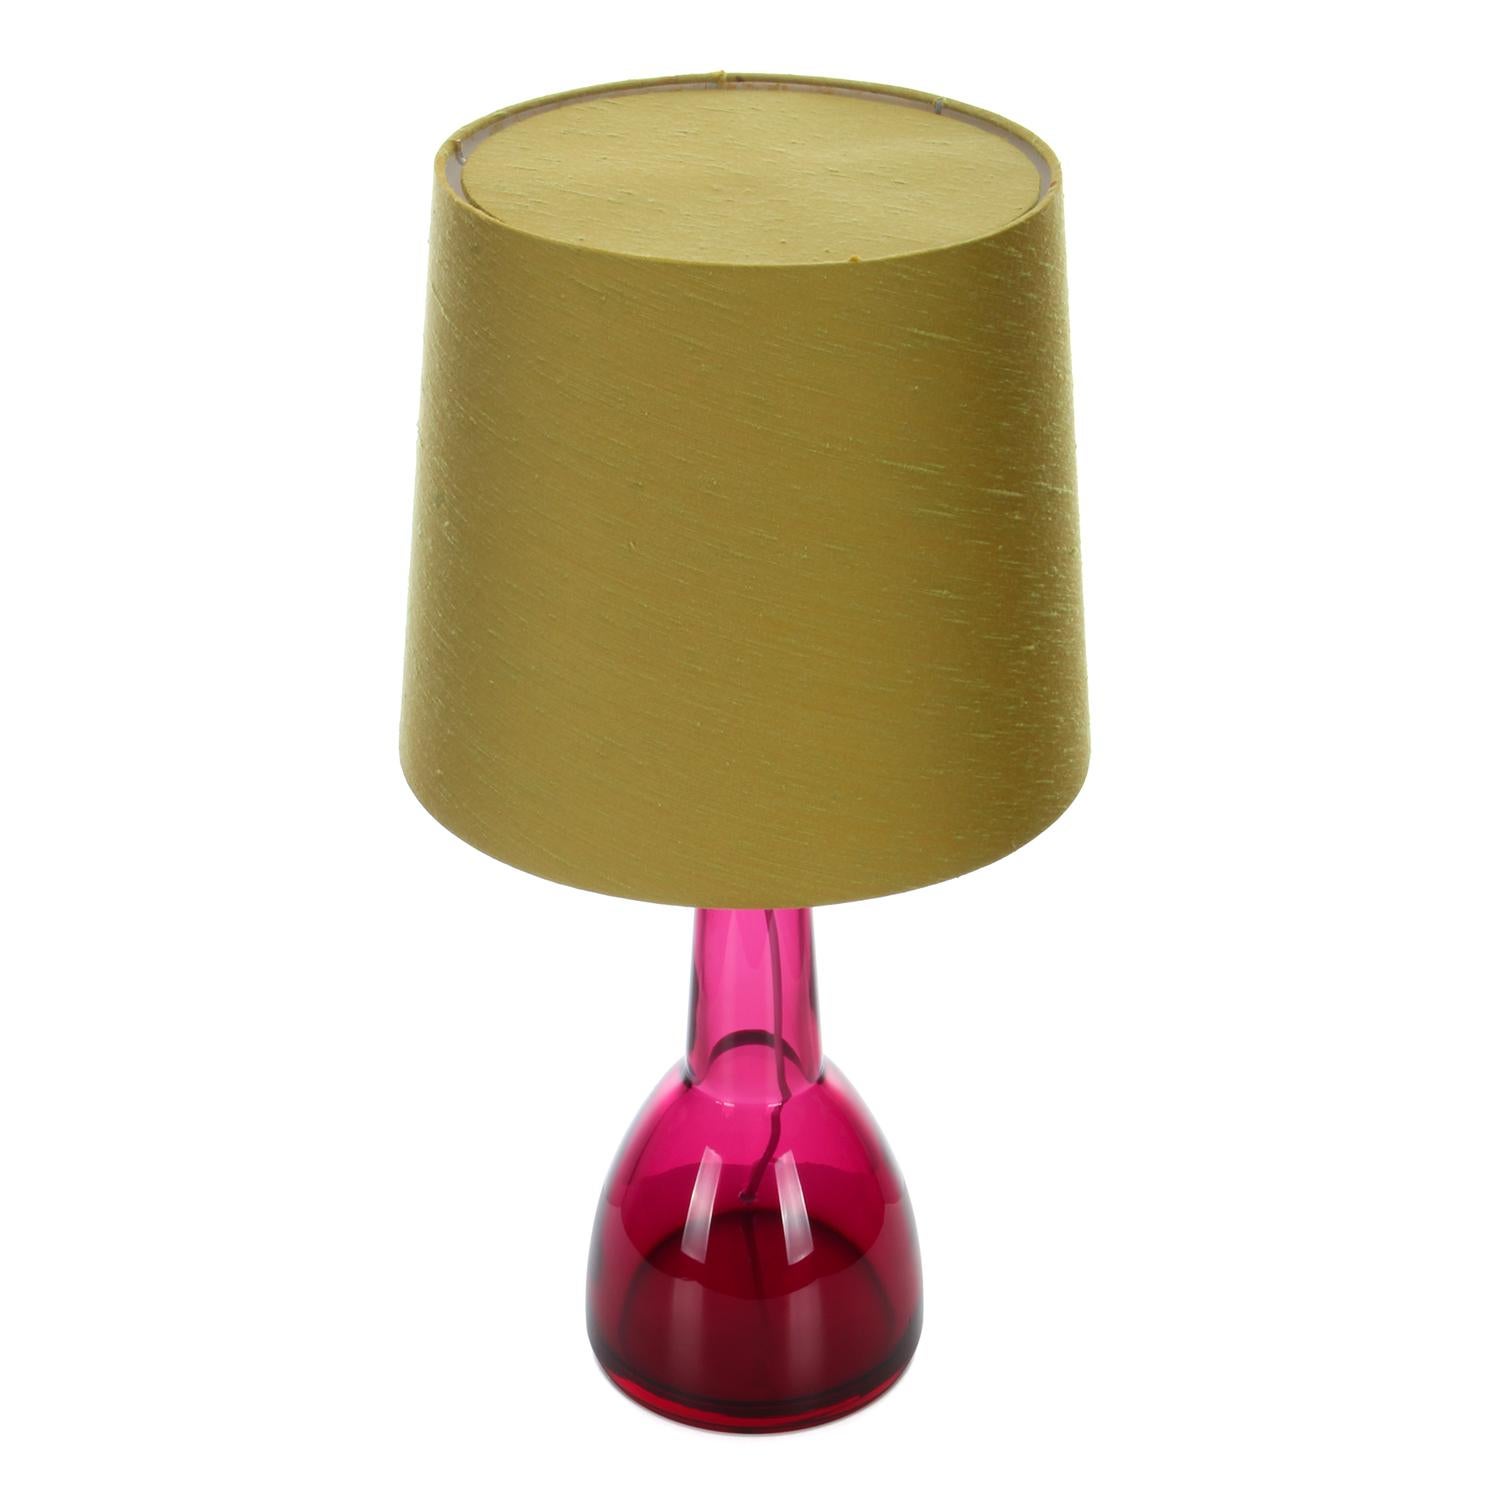 Danish Orrefors Table Lamp 1960s Pink Glass Table Lamp Including Vintage Textile Shade